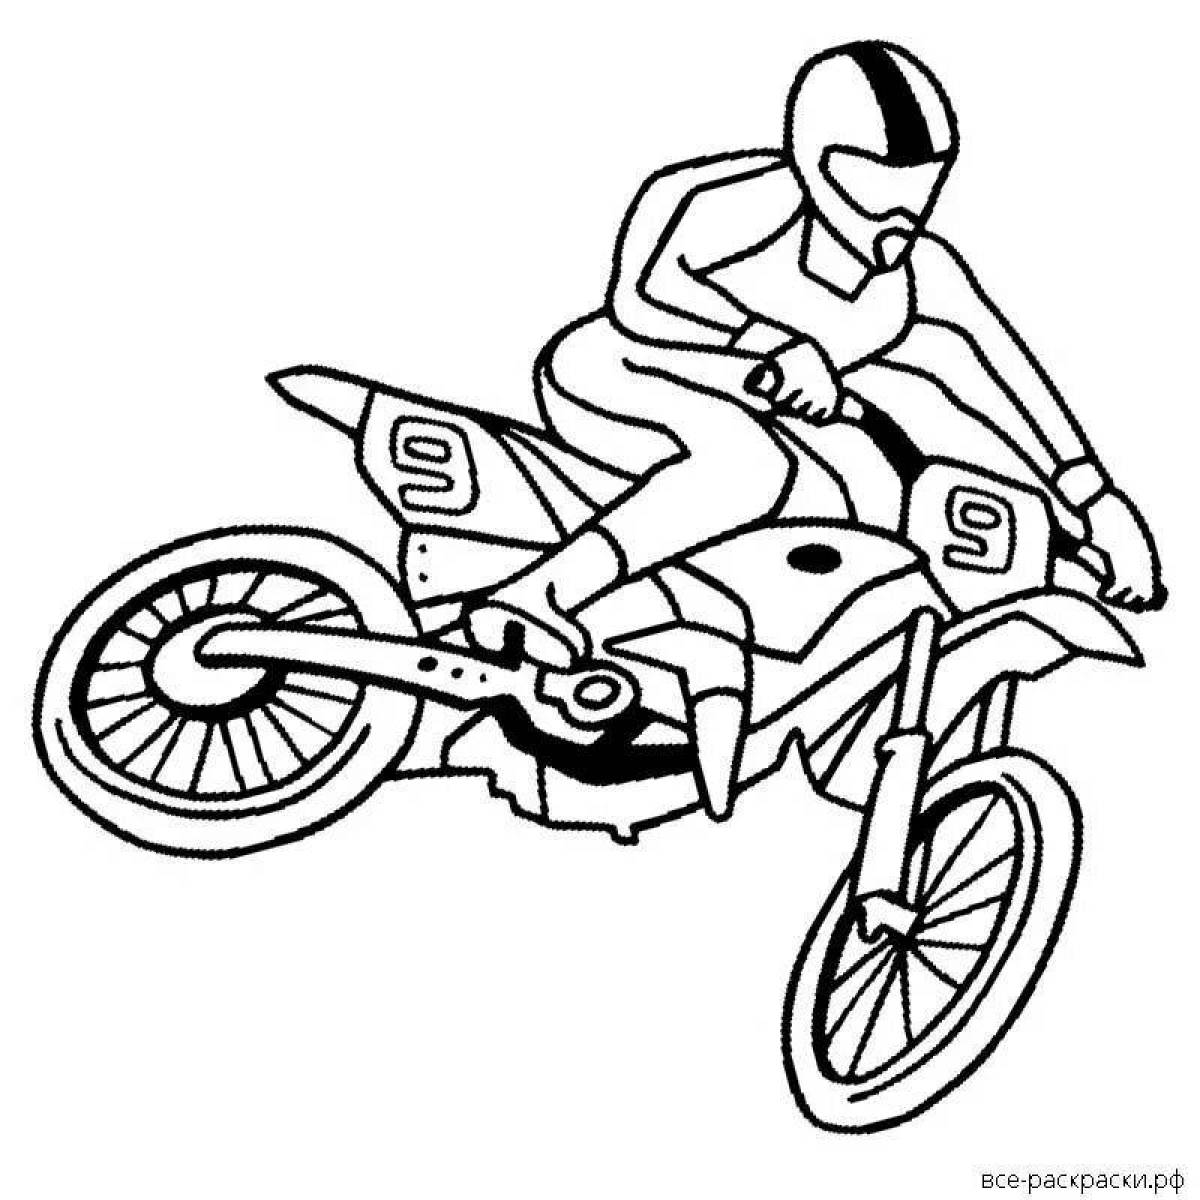 Stern motorcyclist coloring page